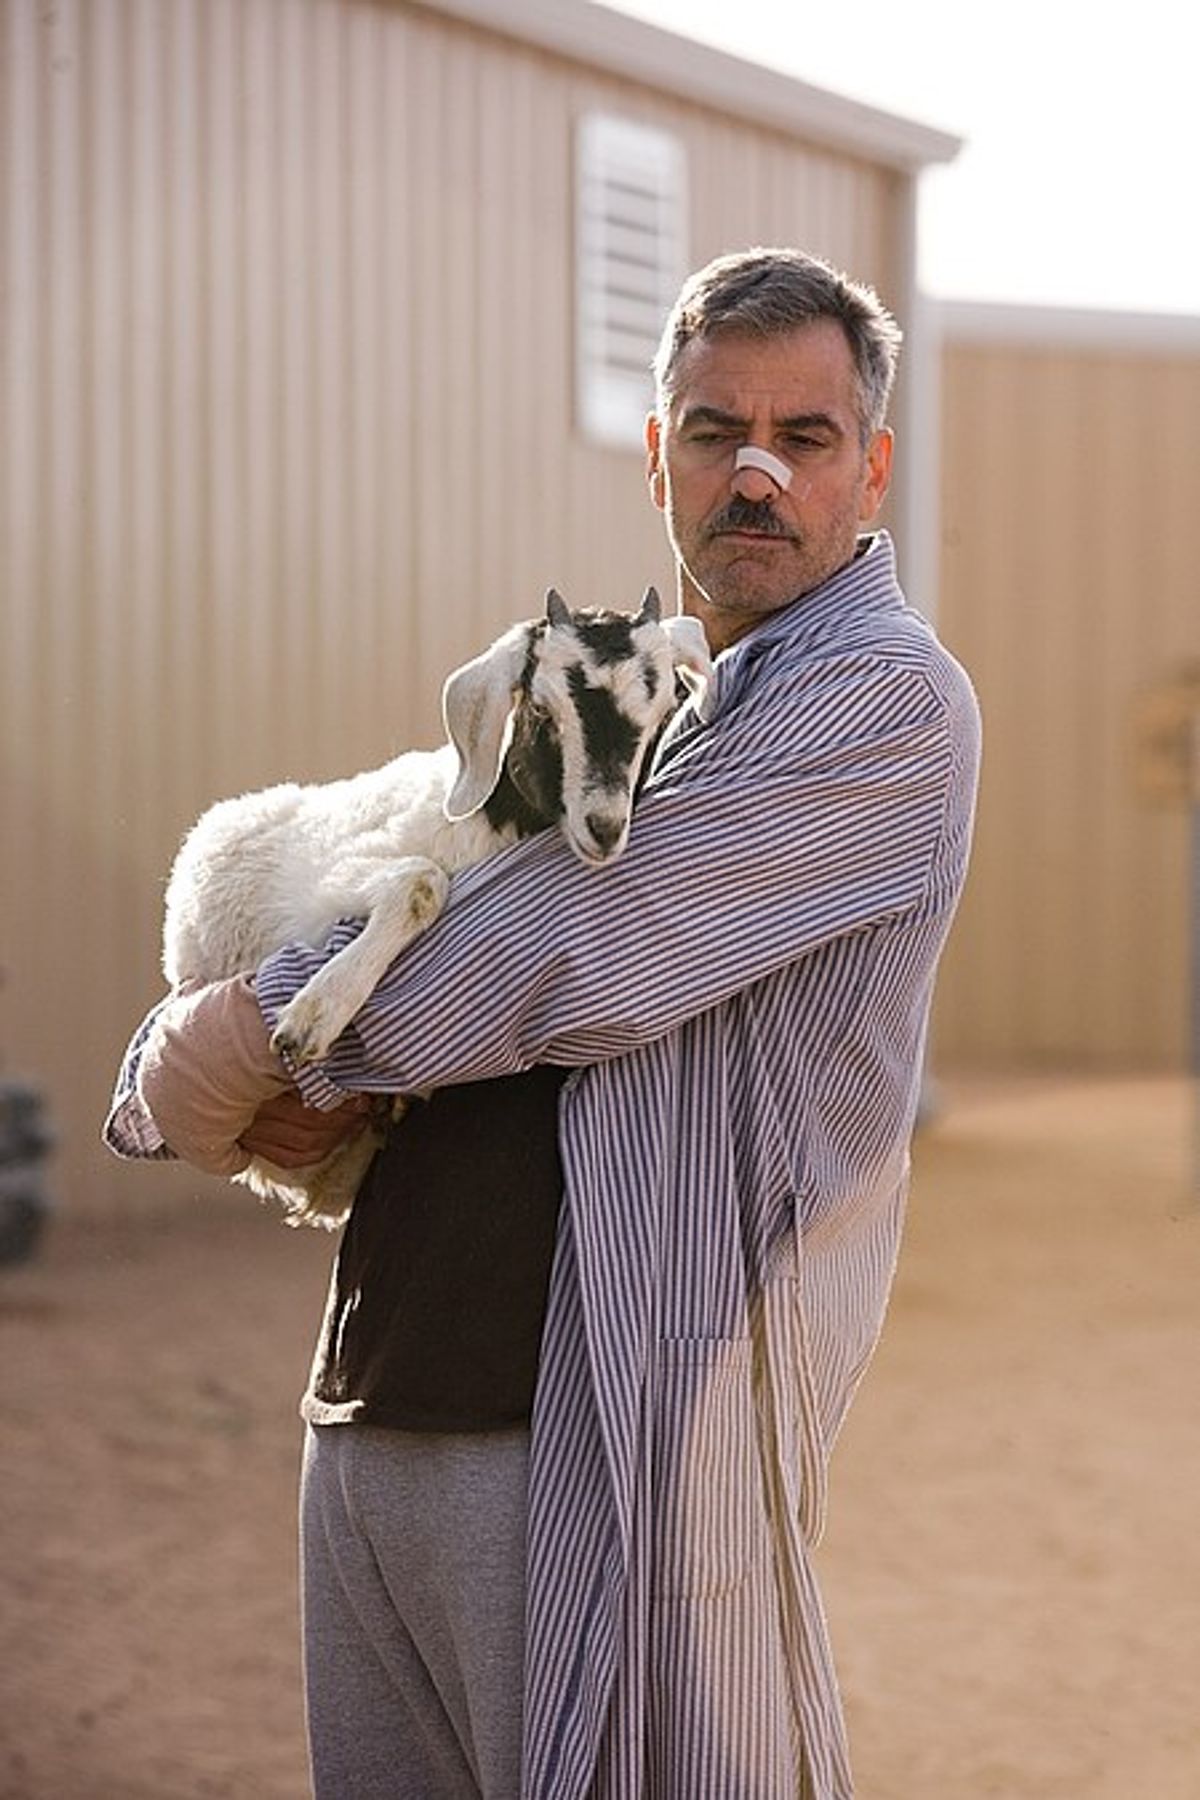 George Clooney in "The Men Who Stare at Goats."     (Laura Macgruder)